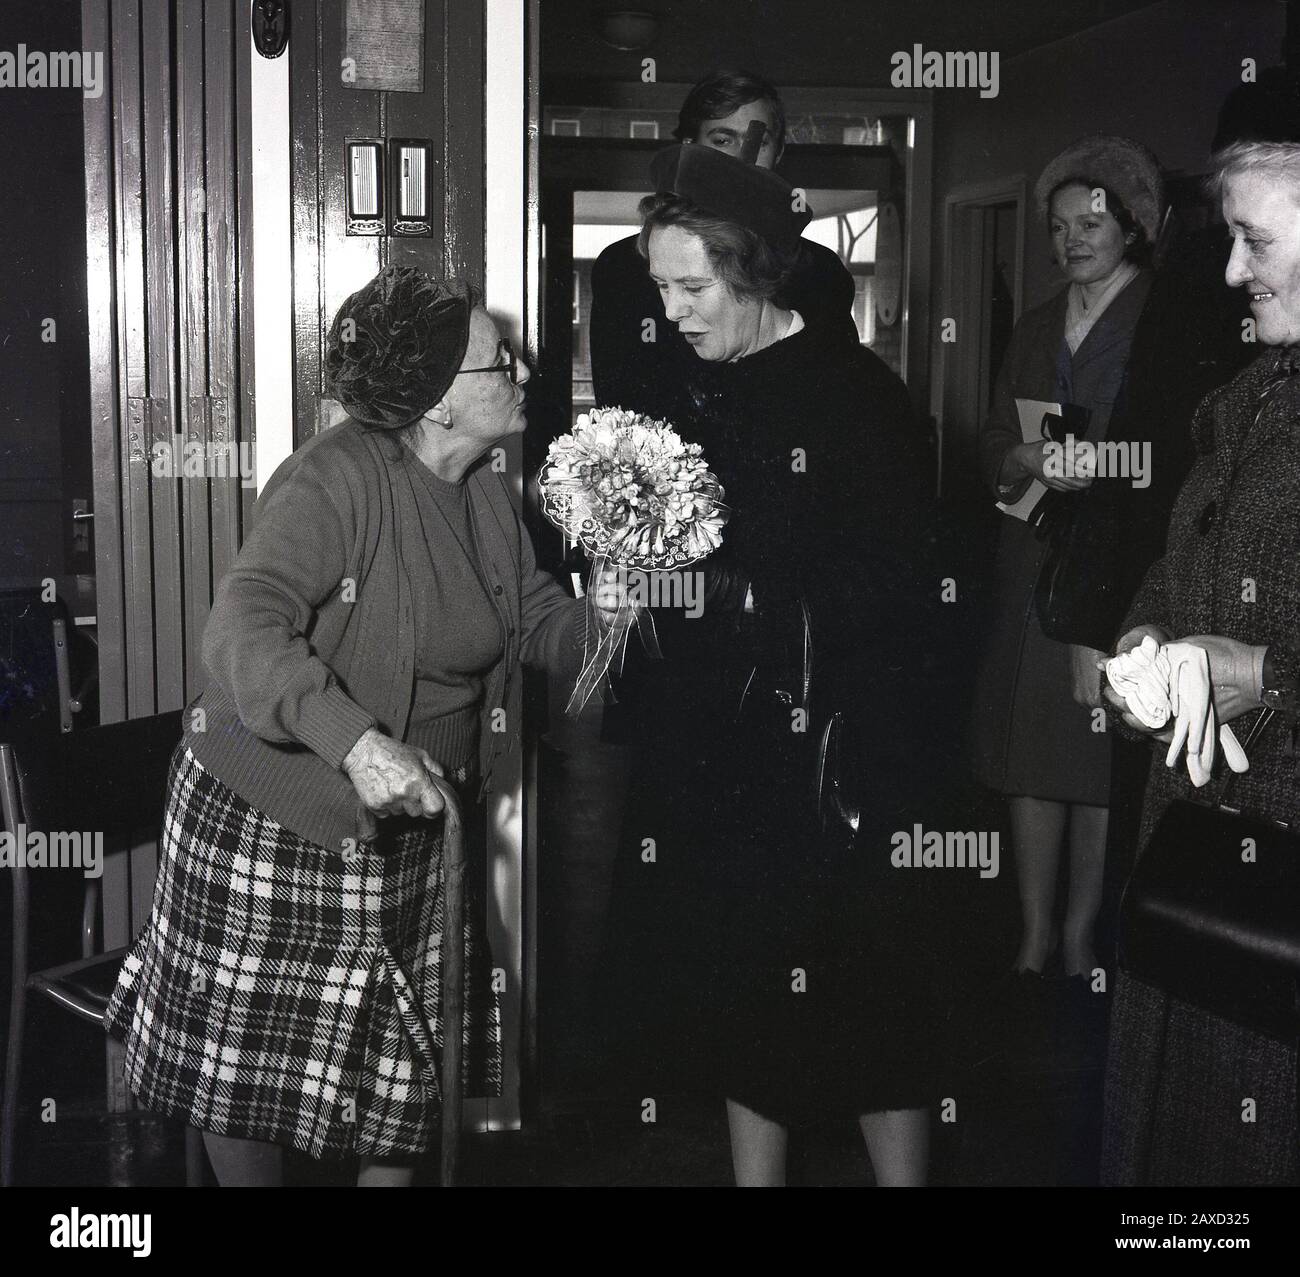 1960s, historical, Mrs Wison, the wife of the British Prime Minster, Harold Wilson, receiving a bunch of flowers from a female resident of an old peoples home, on visit there, South London, England, UK. The spouse of British prime ministers do not have official roles or duties, but have often undertaken charitable work and visits to those on the margin of society. The daughter of a congregationalist minister, Mary Wilson was an unassuming woman who wrote poetry and enjoyed family life and became  the first spouse of a British prime minister to live beyond 100, at 102 years. Stock Photo